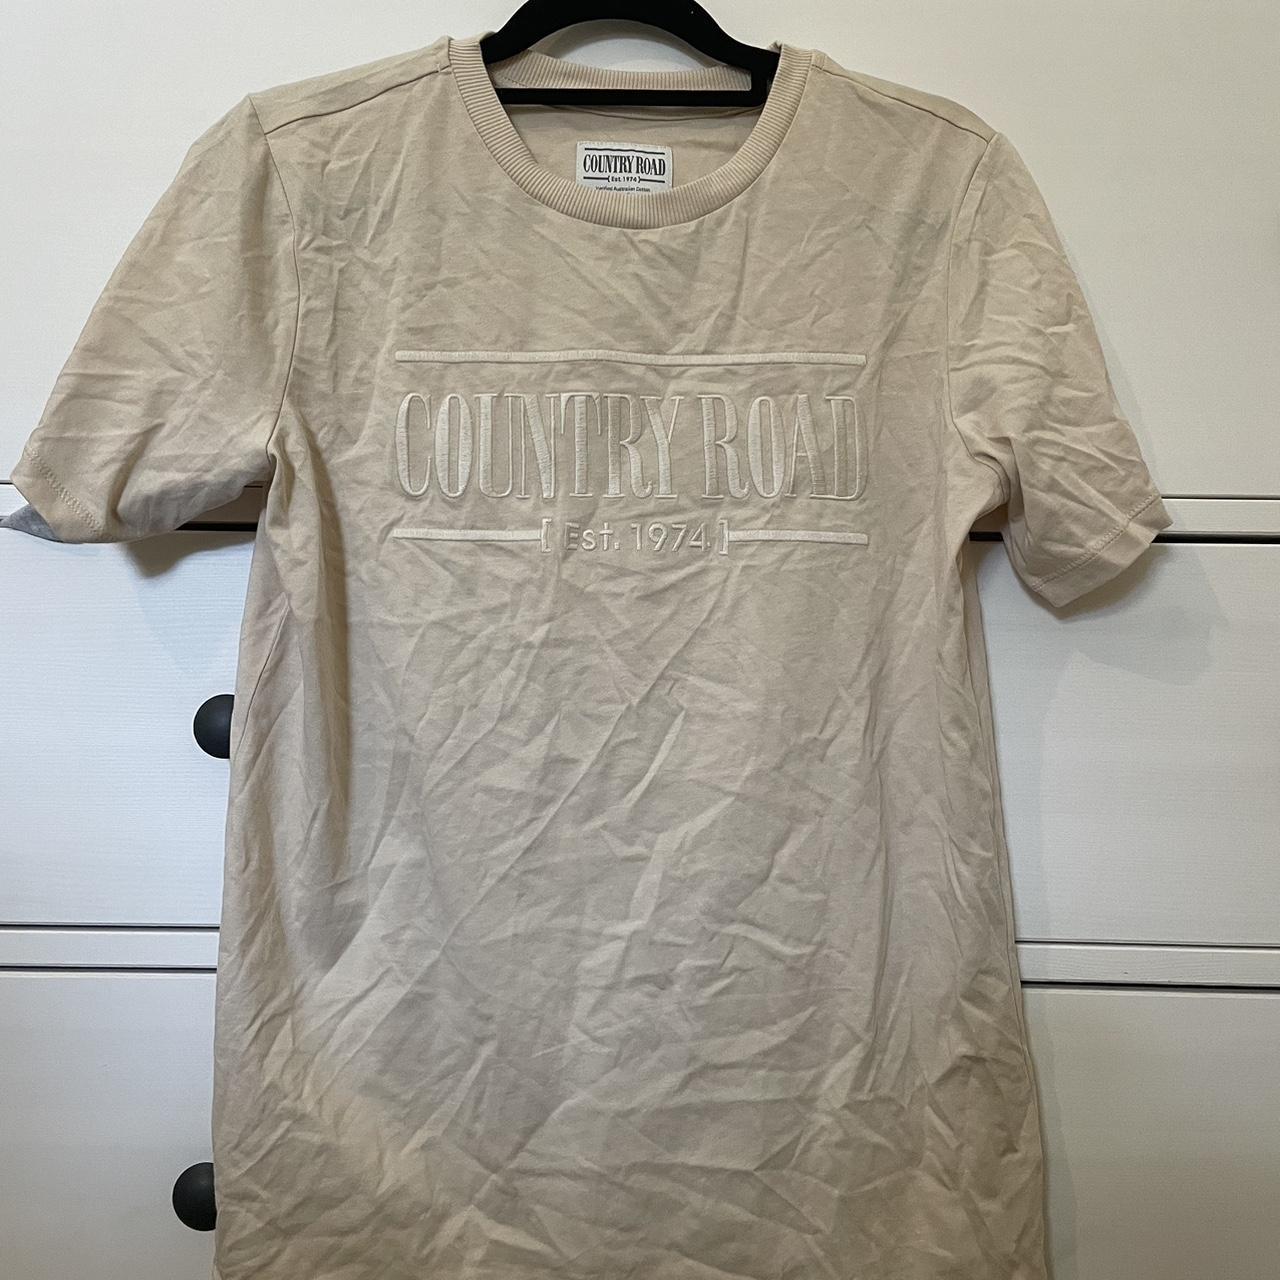 BRAND NEW WITHOUT TAGS Country road classic logo... - Depop